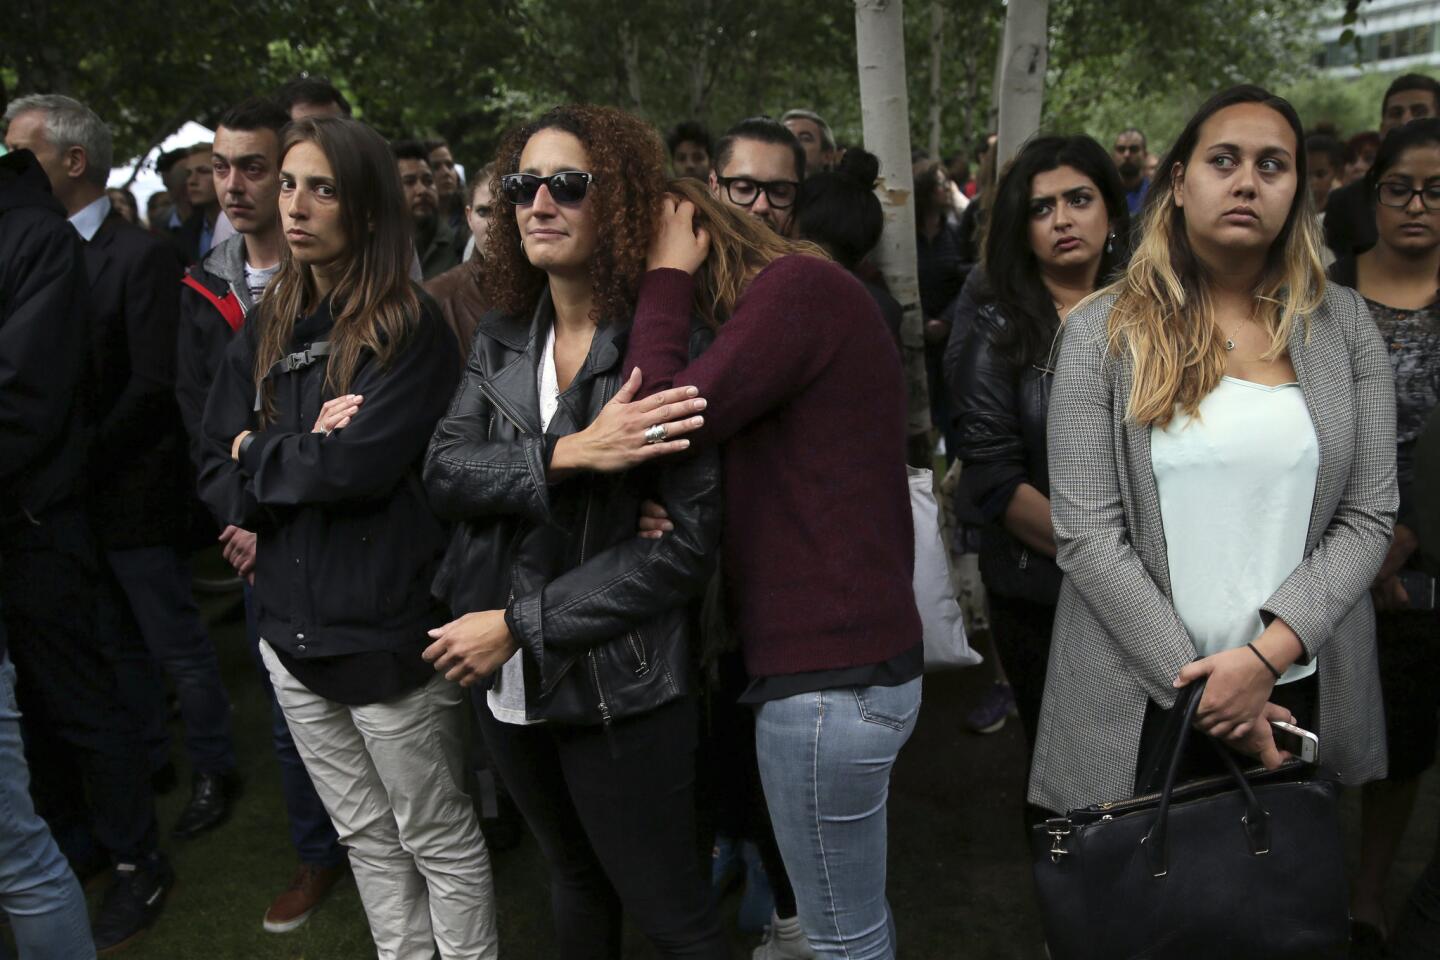 People attend a vigil for victims of Saturday's attack at Potters Fields Park in London on Monday.